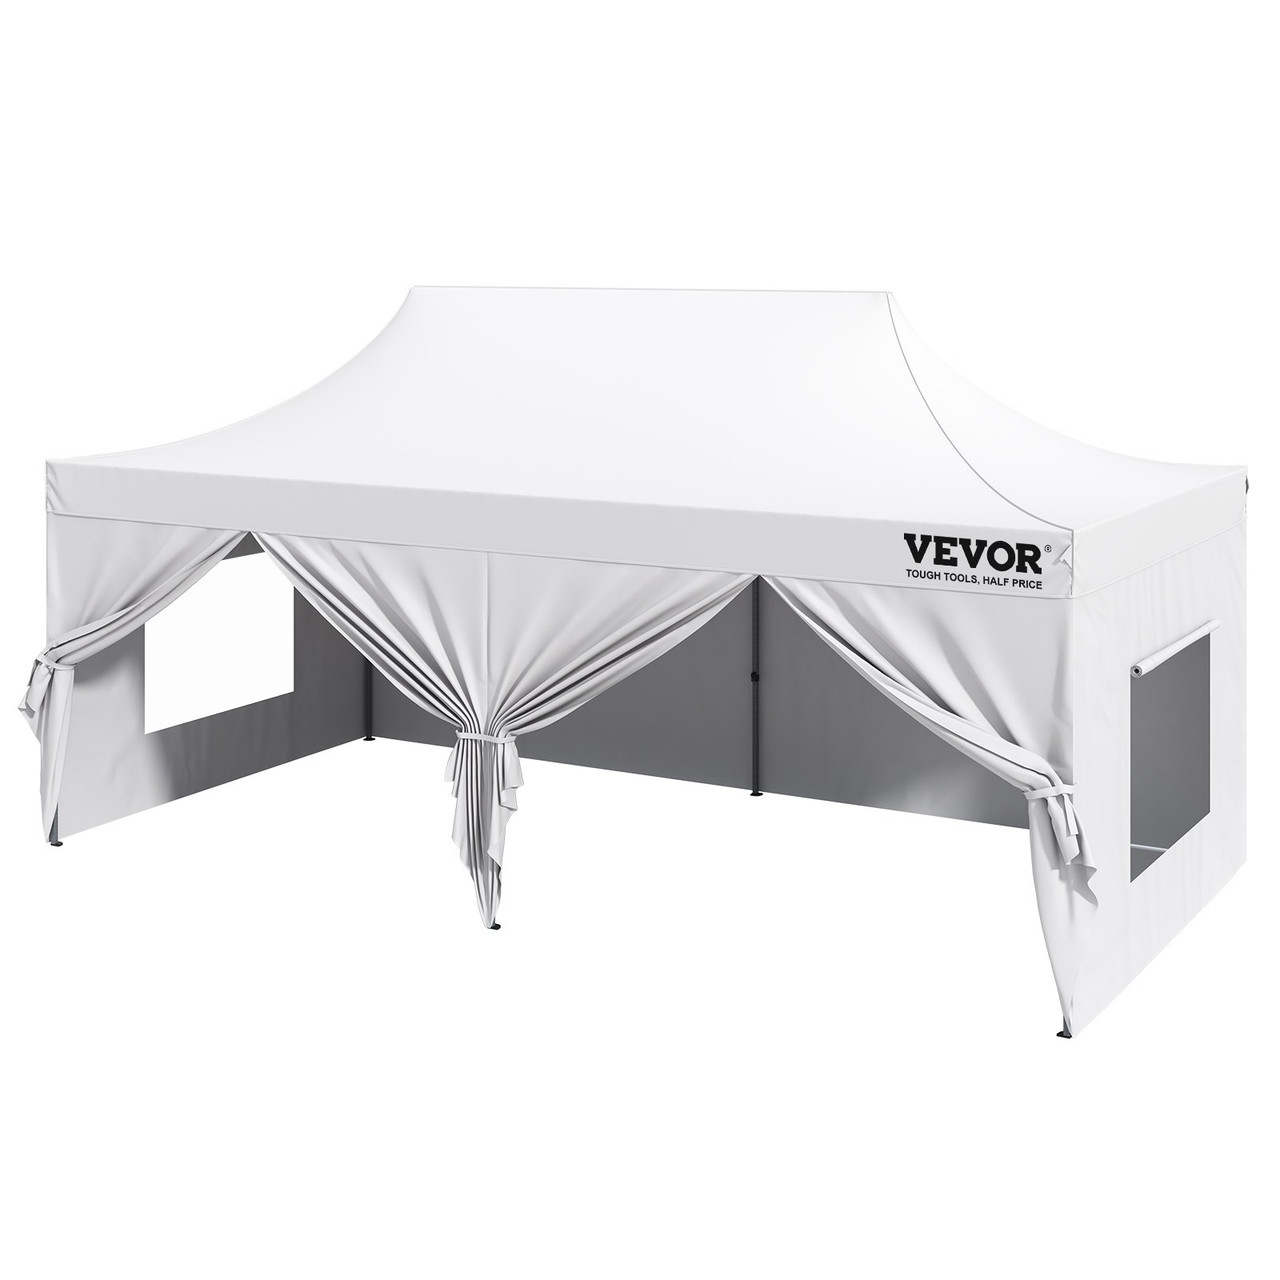 10x20 FT Pop up Canopy with Removable Sidewalls, Instant Canopies Portable Gazebo & Wheeled Bag, UV Resistant Waterproof, Enclosed Canopy Tent for Outdoor Events, Patio, Backyard, Party, Parking